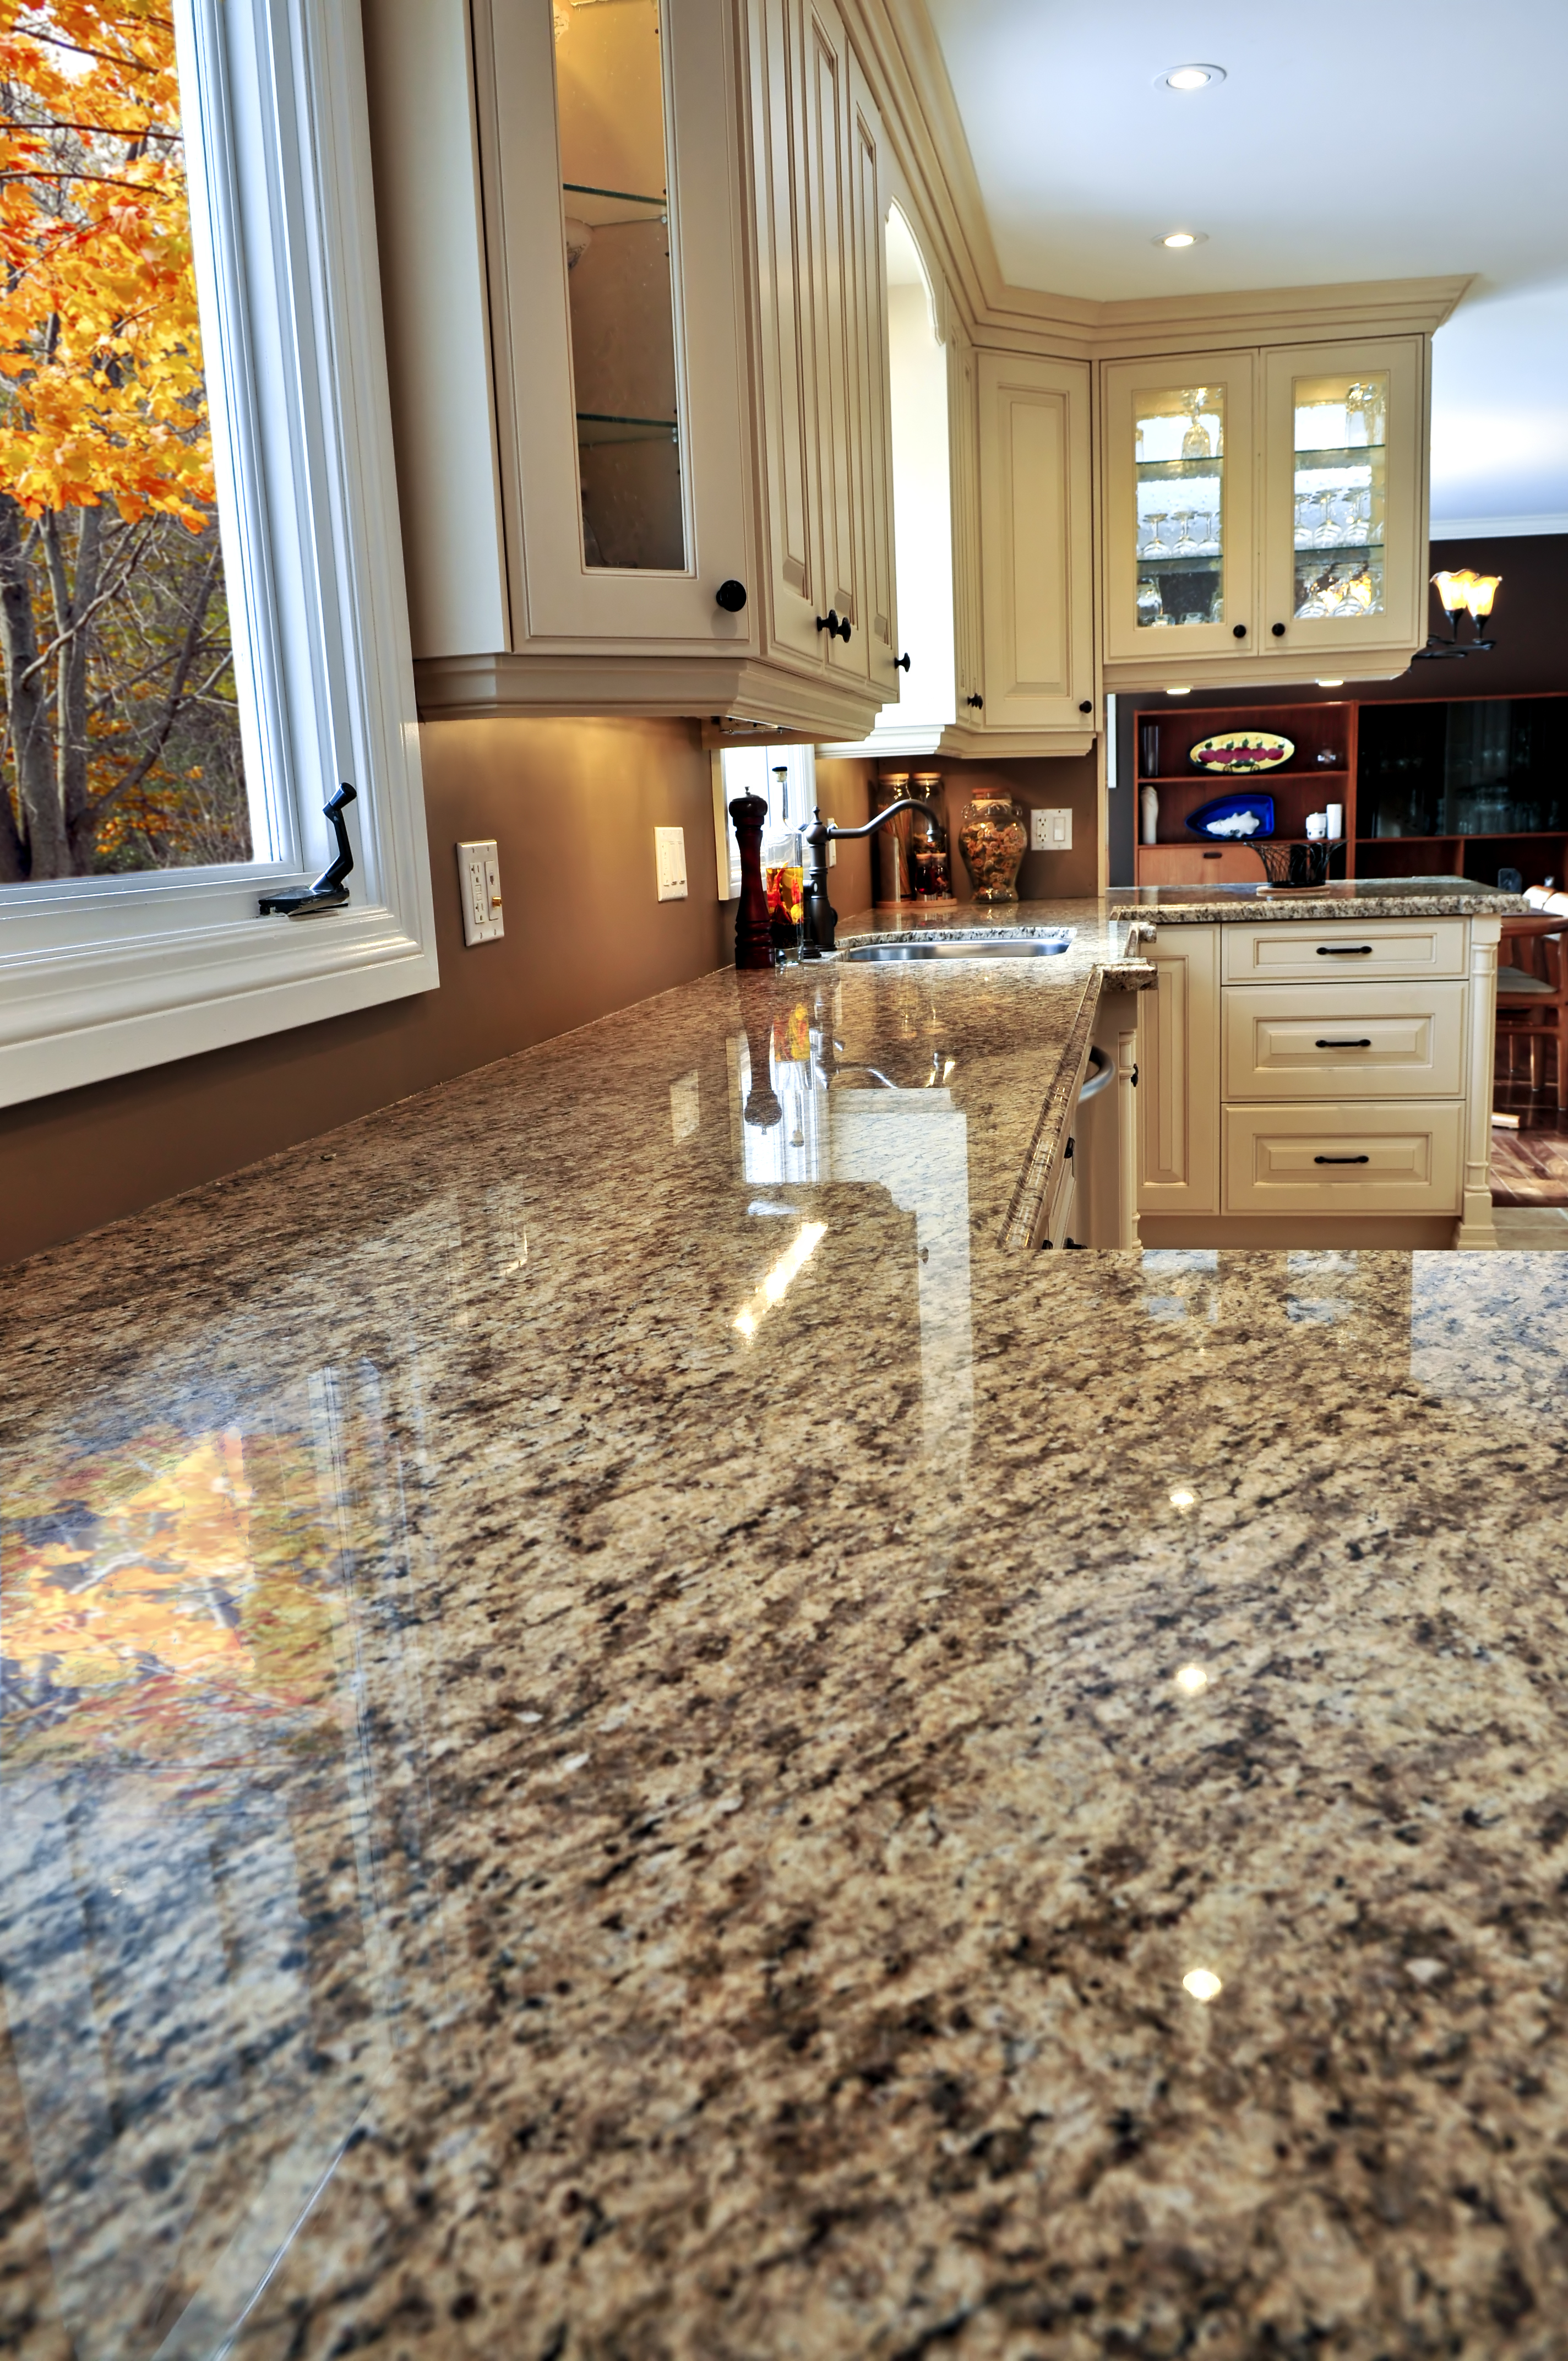 7 Common Kitchen Countertop Problems, How To Protect Laminate Countertop